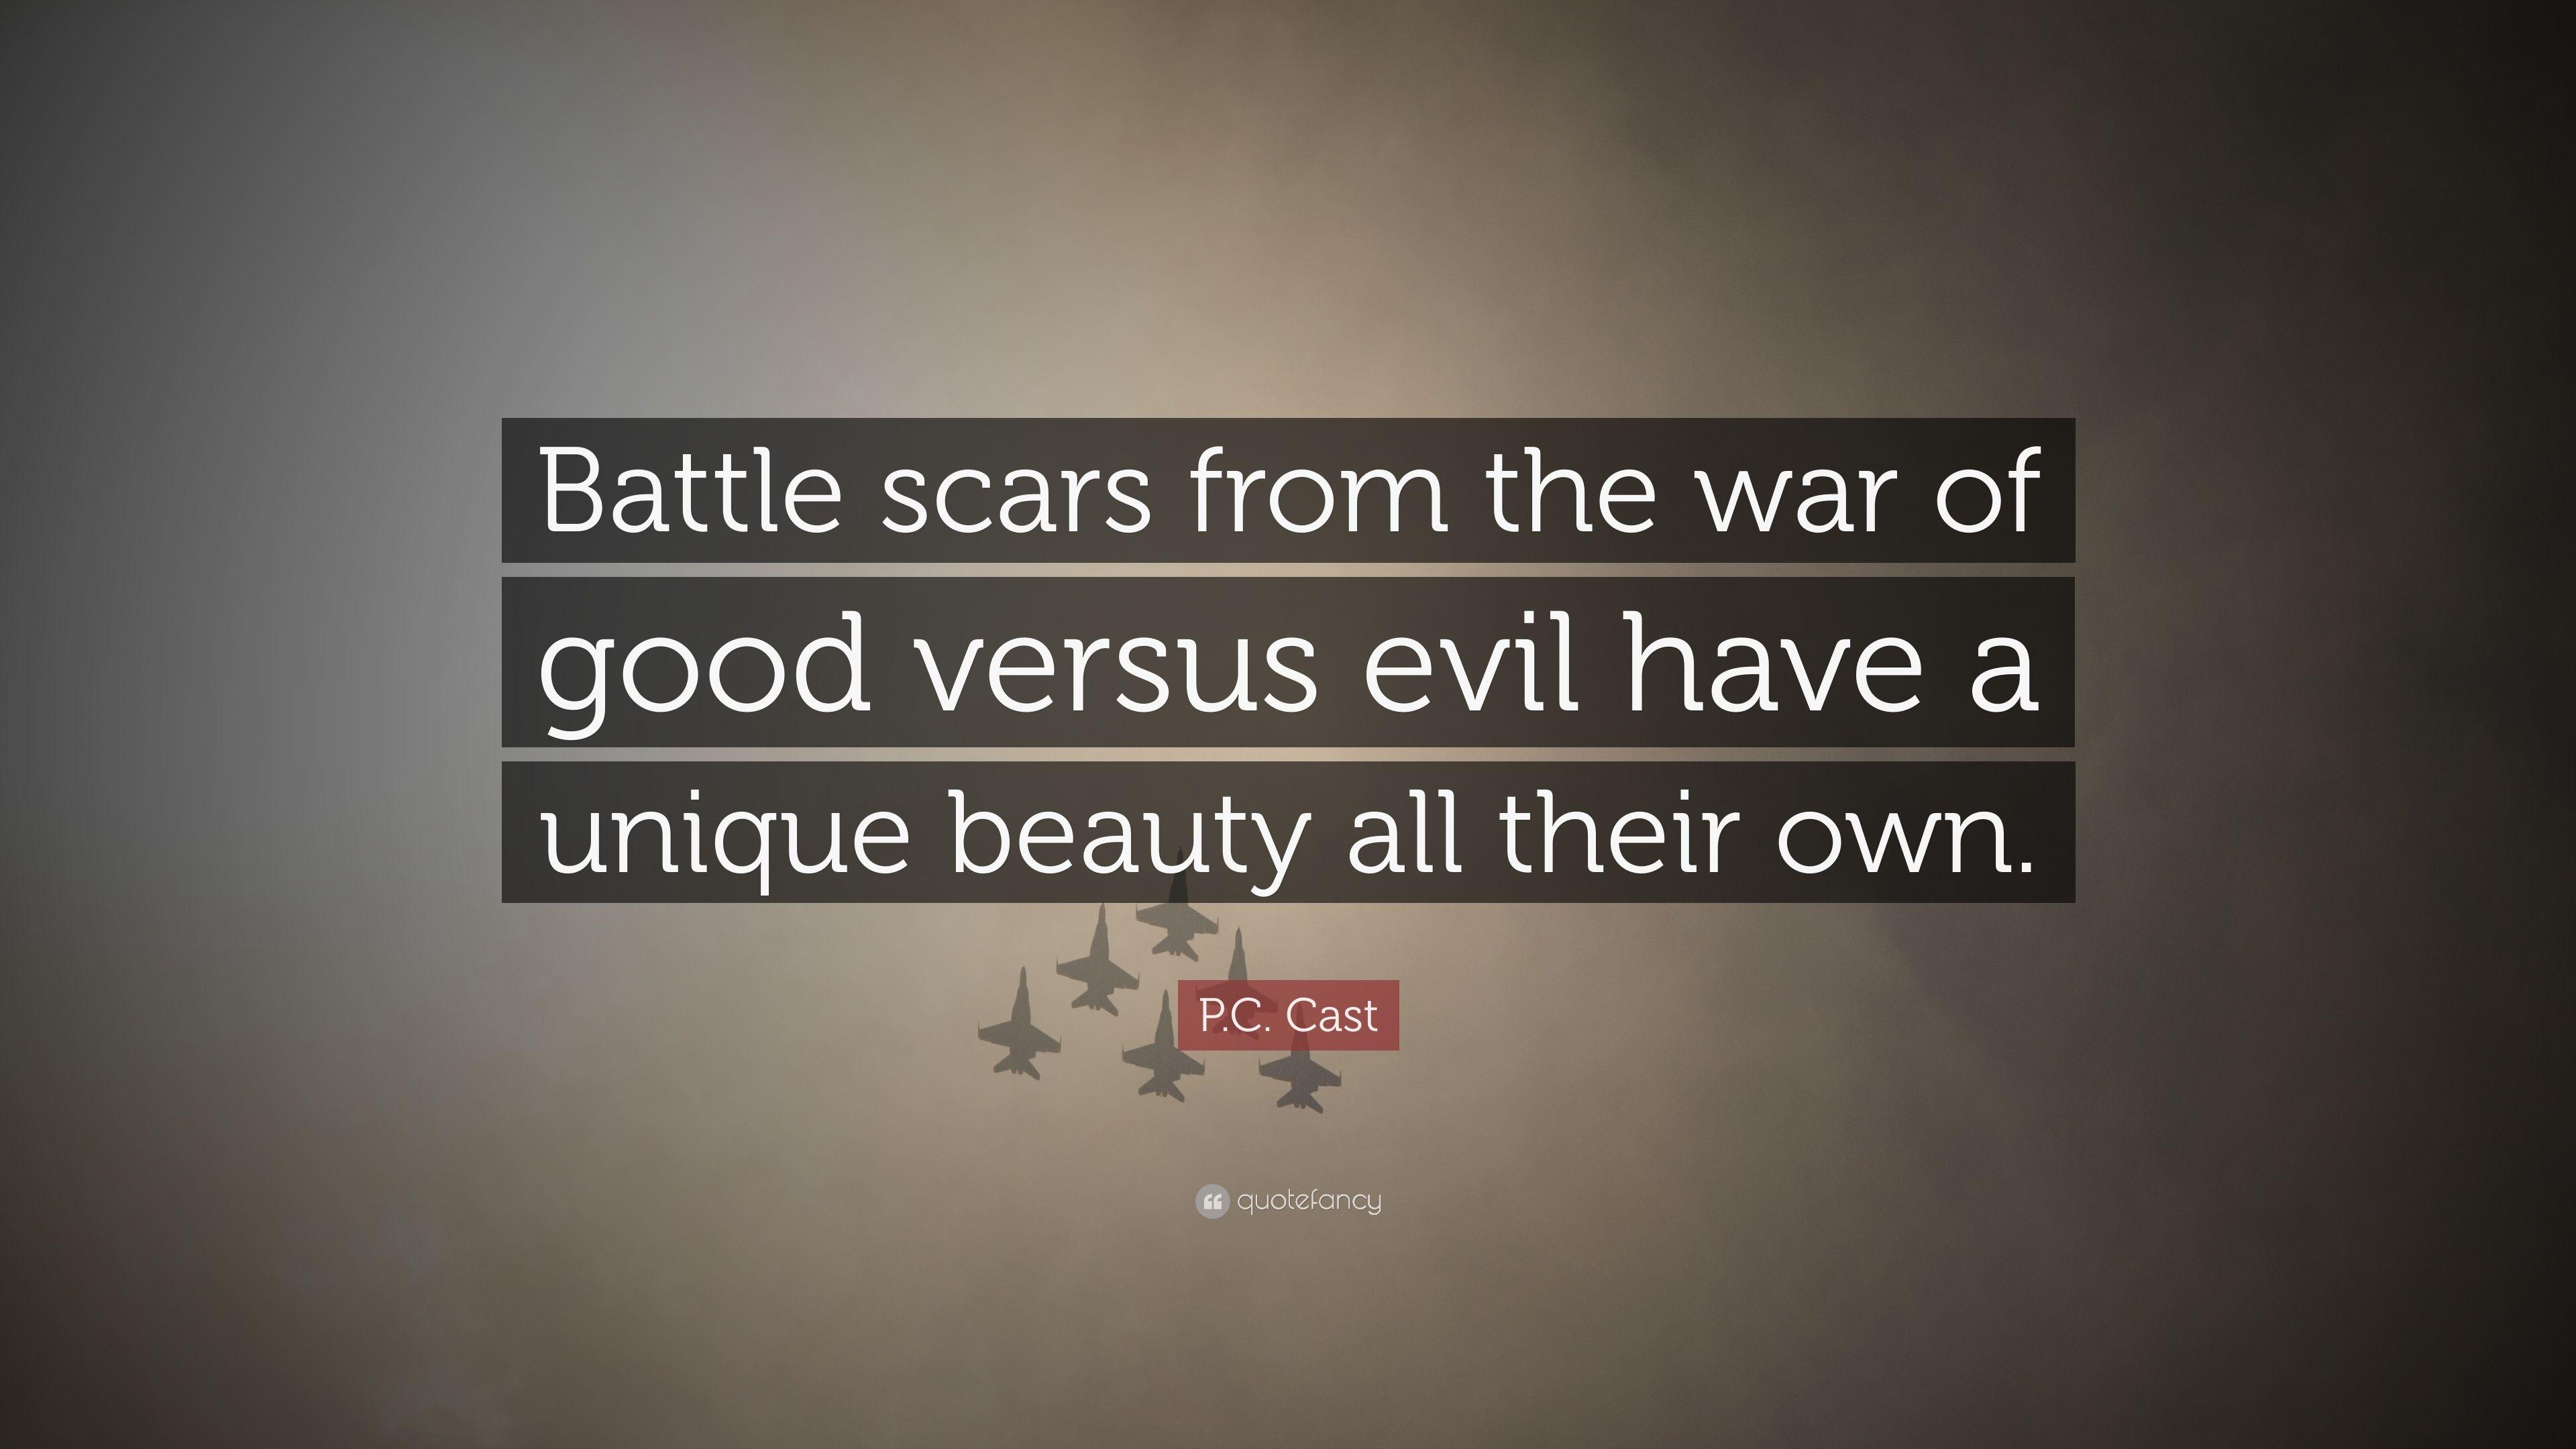 P.C. Cast Quote: “Battle scars from the war of good versus evil have